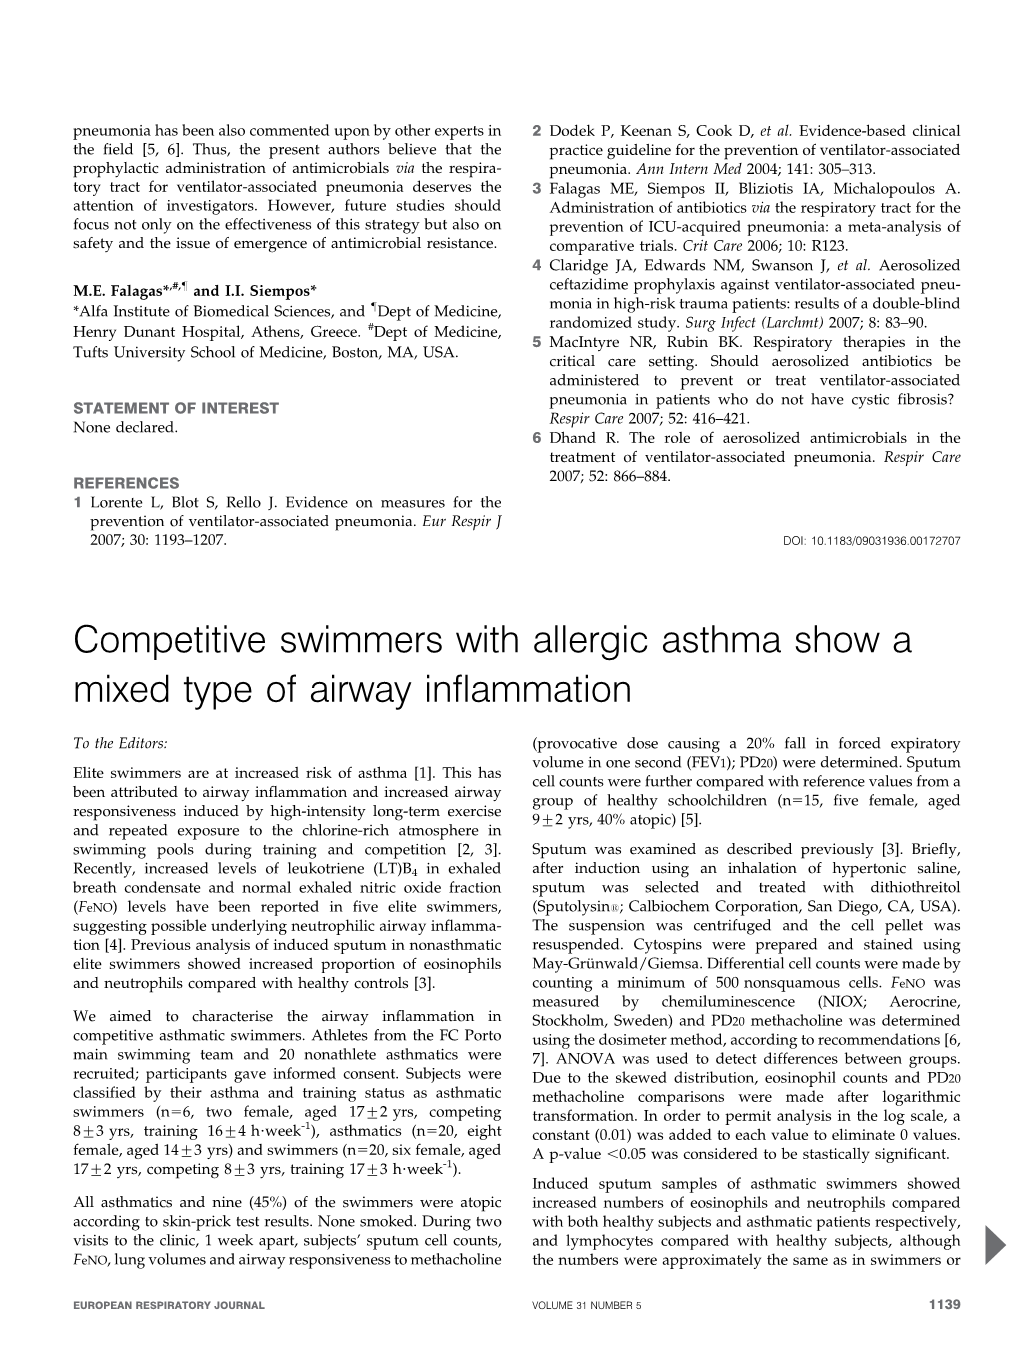 Competitive Swimmers with Allergic Asthma Show a Mixed Type of Airway Inflammation